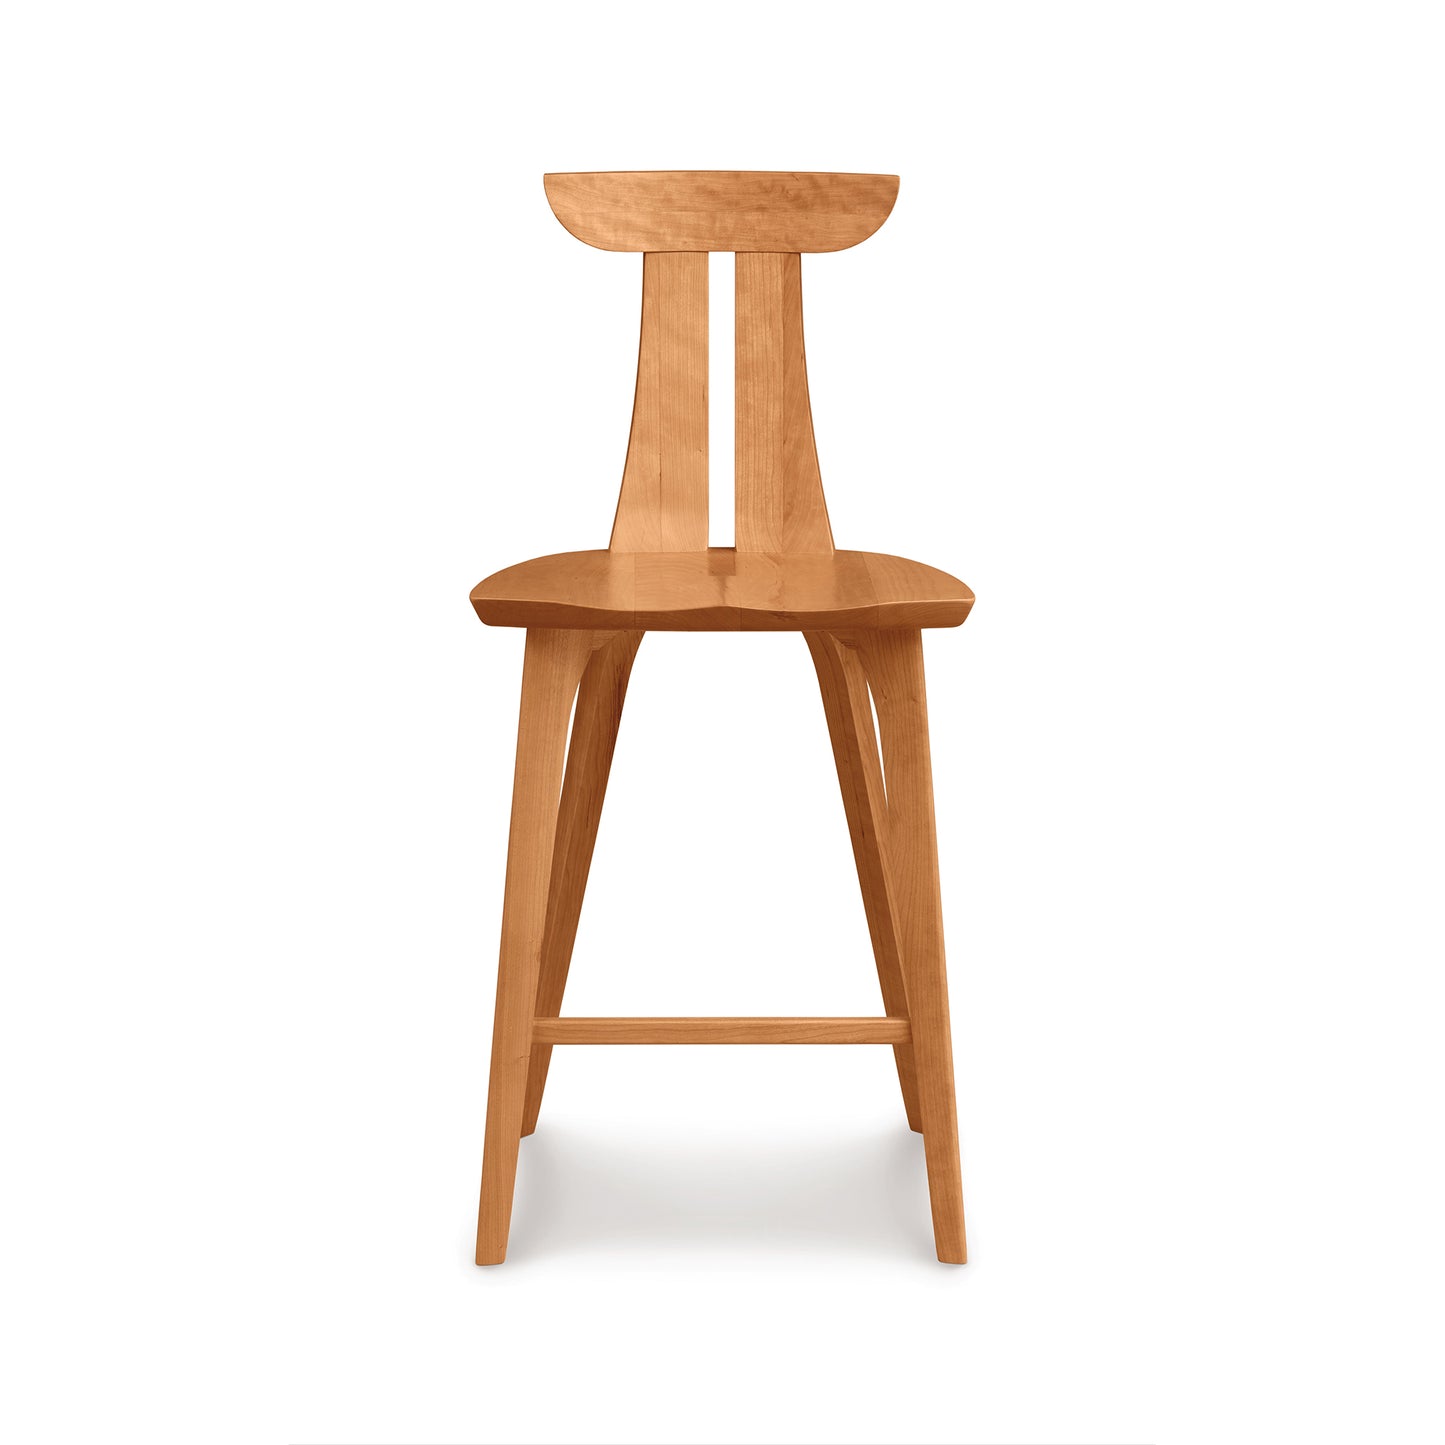 A mid-century modern Estelle Counter Stool by Copeland Furniture with a tall backrest isolated on a white background.